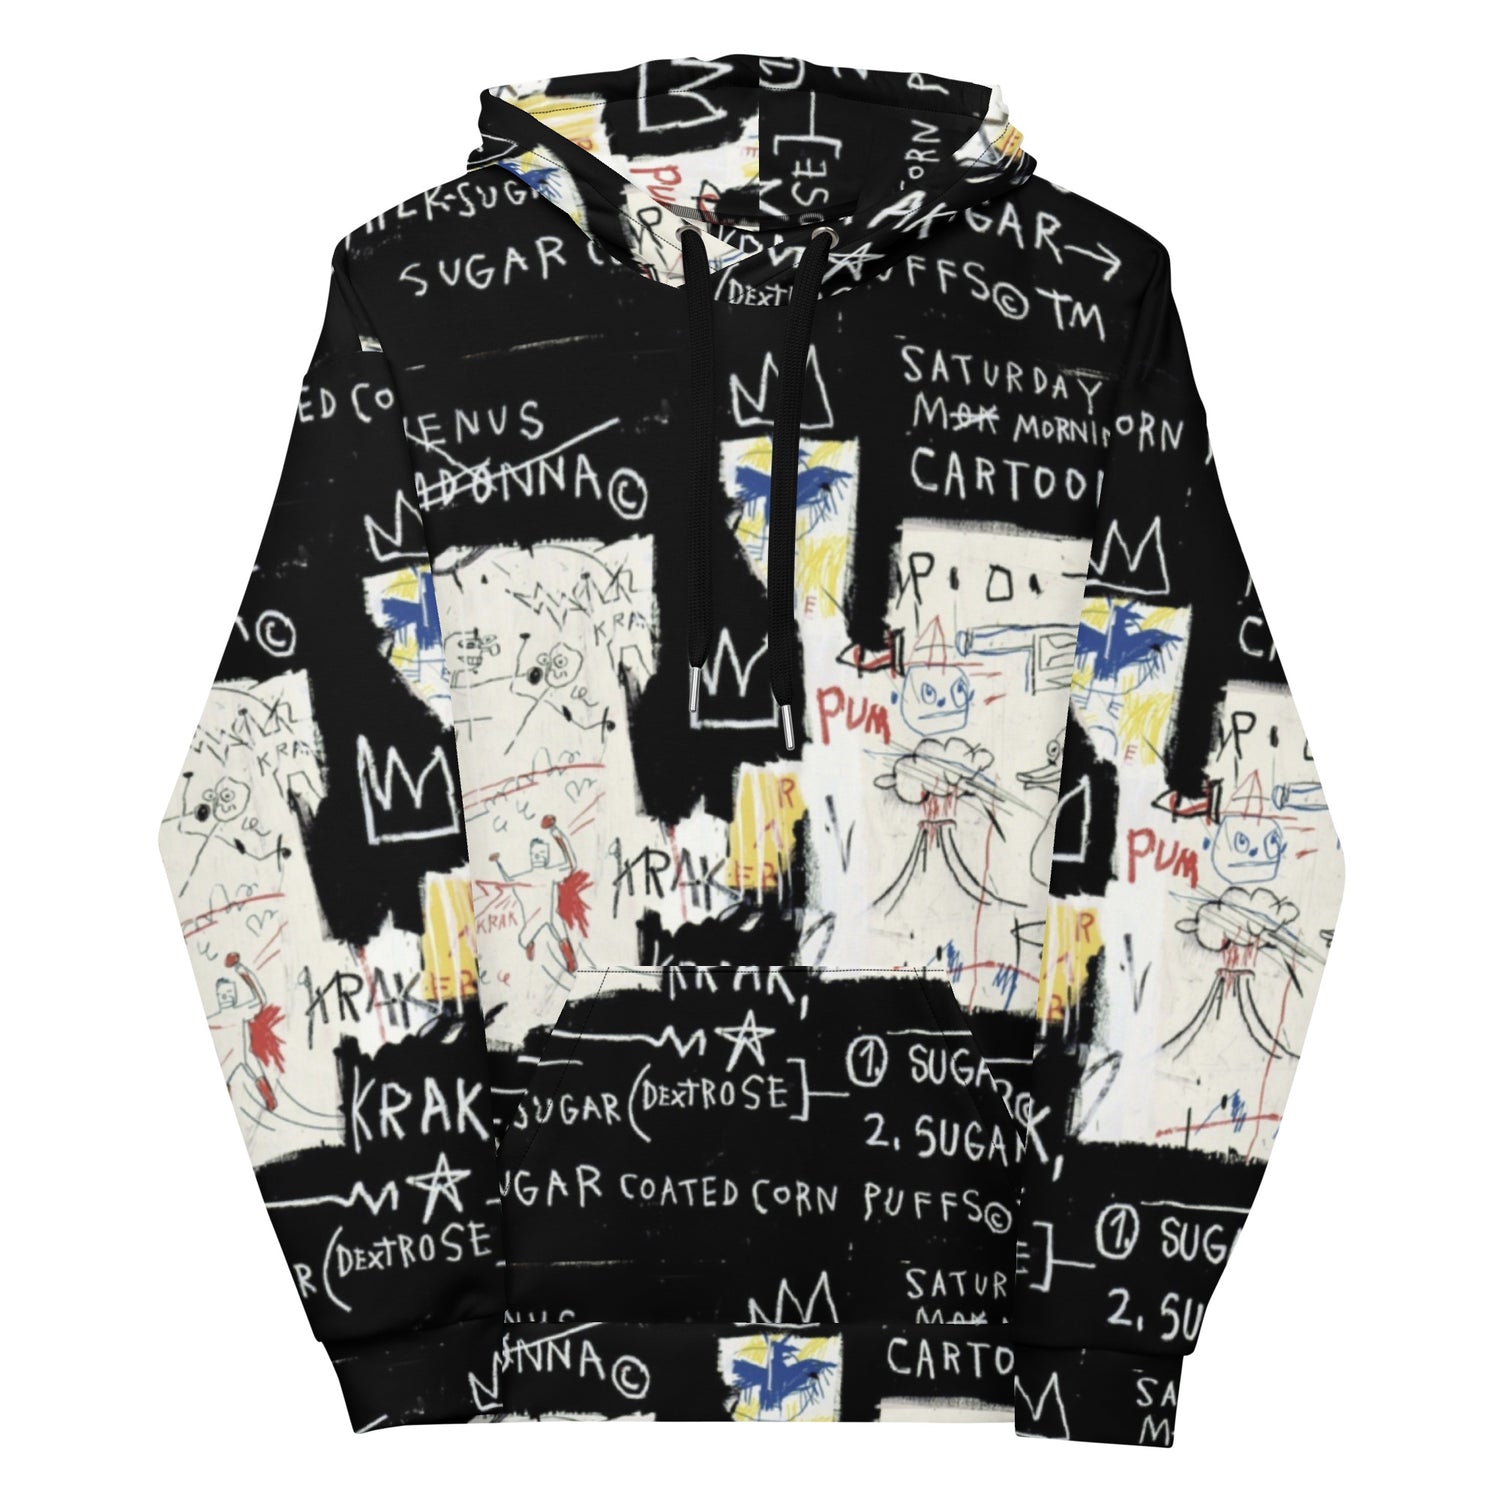 Jean-Michel Basquiat "A Panel of Experts" Artwork All Over Printed Black and White Sweatshirt Hoodie Scattered Streetwear